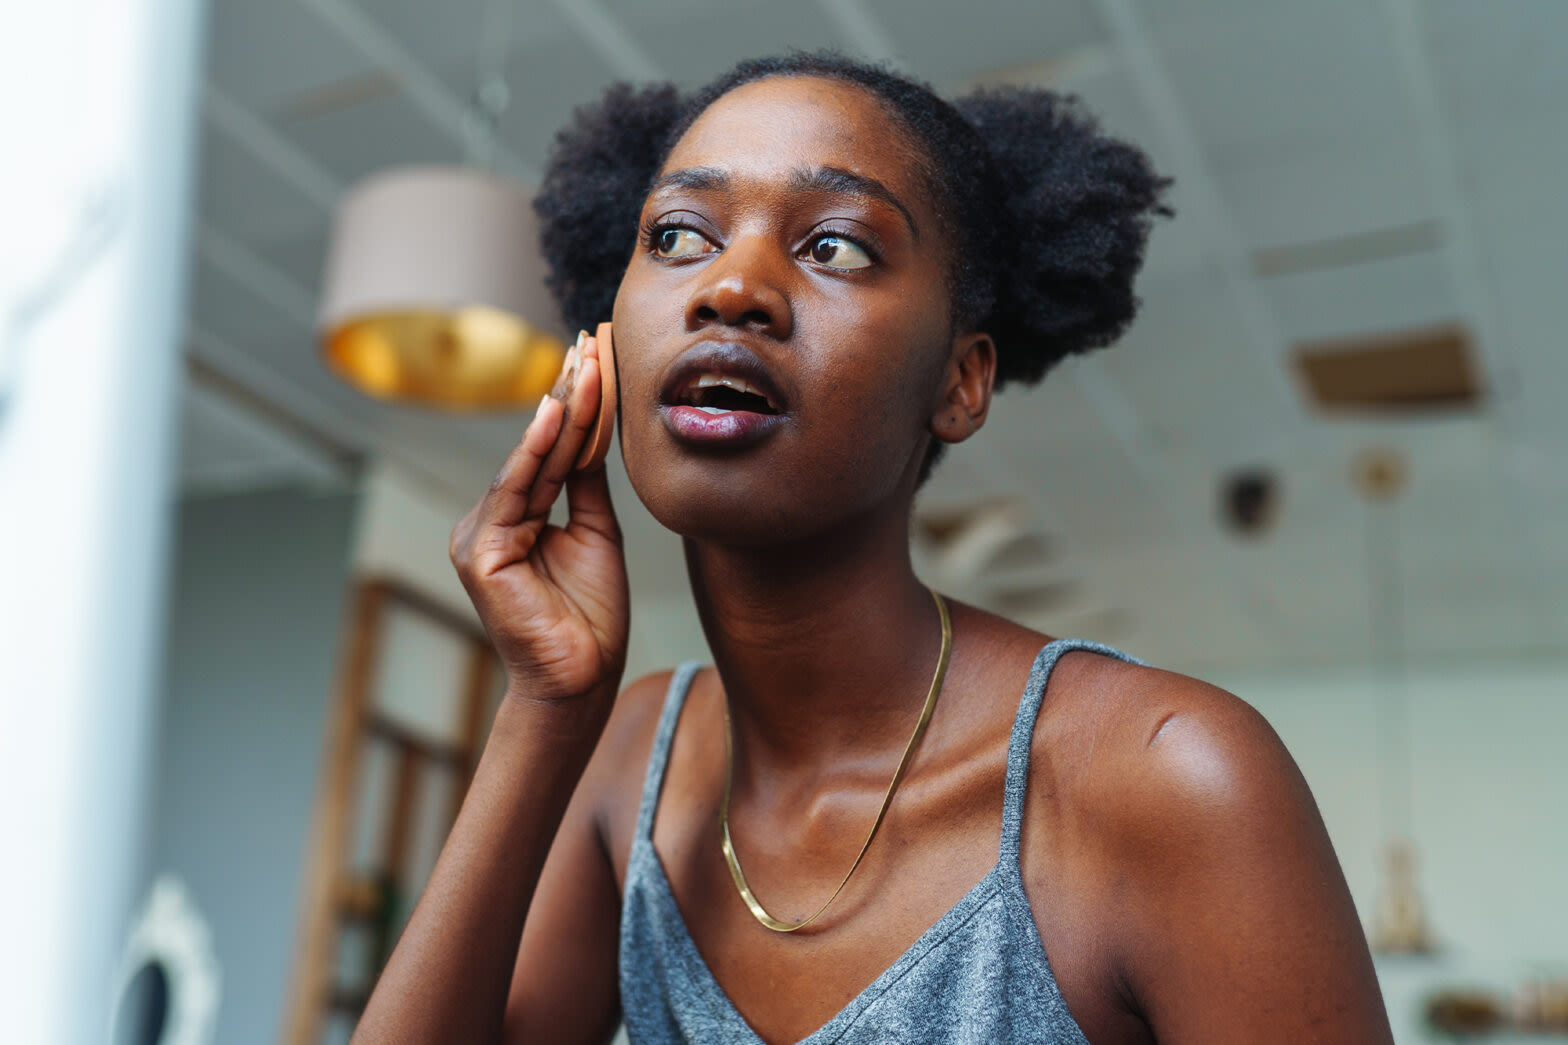 This Kenya-Based Skincare Company Created To Empower Those With Melanated Skin Has Raised $1.4M In Capital